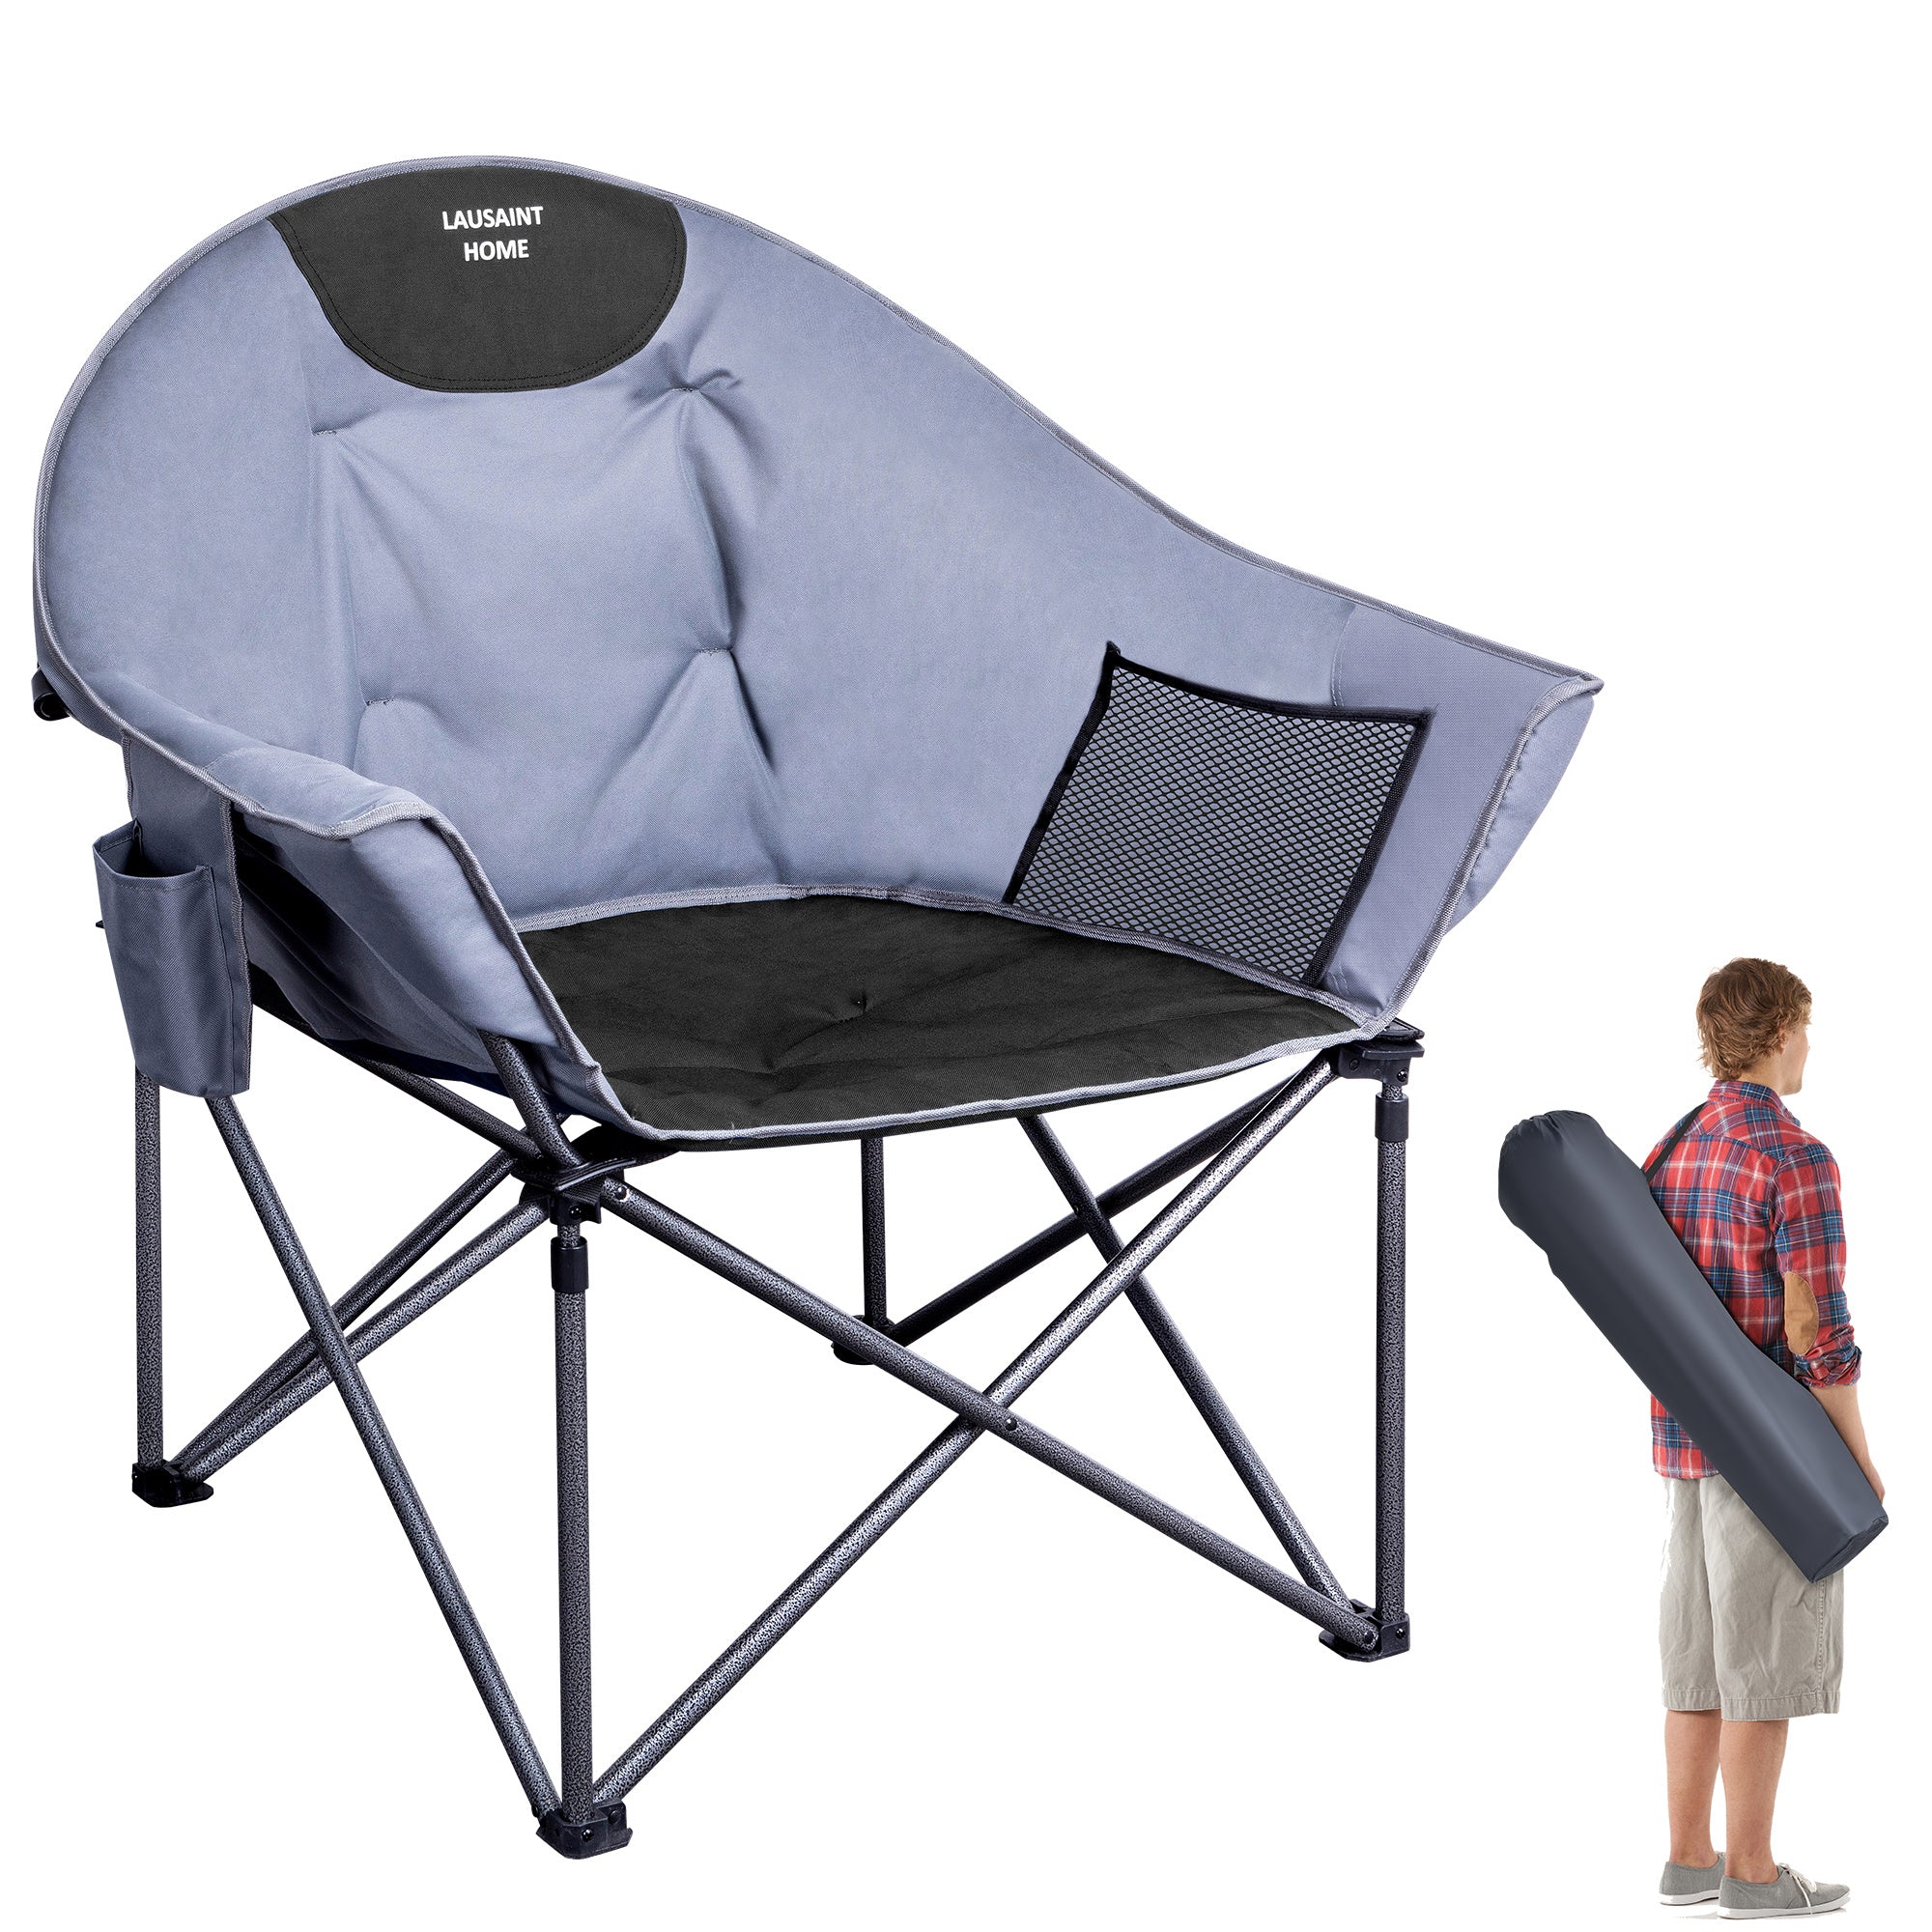 Oversized Camping Chairs, Folding with Carrying Bag, Lightweight Ergonomic Outdoor Lounge Chair